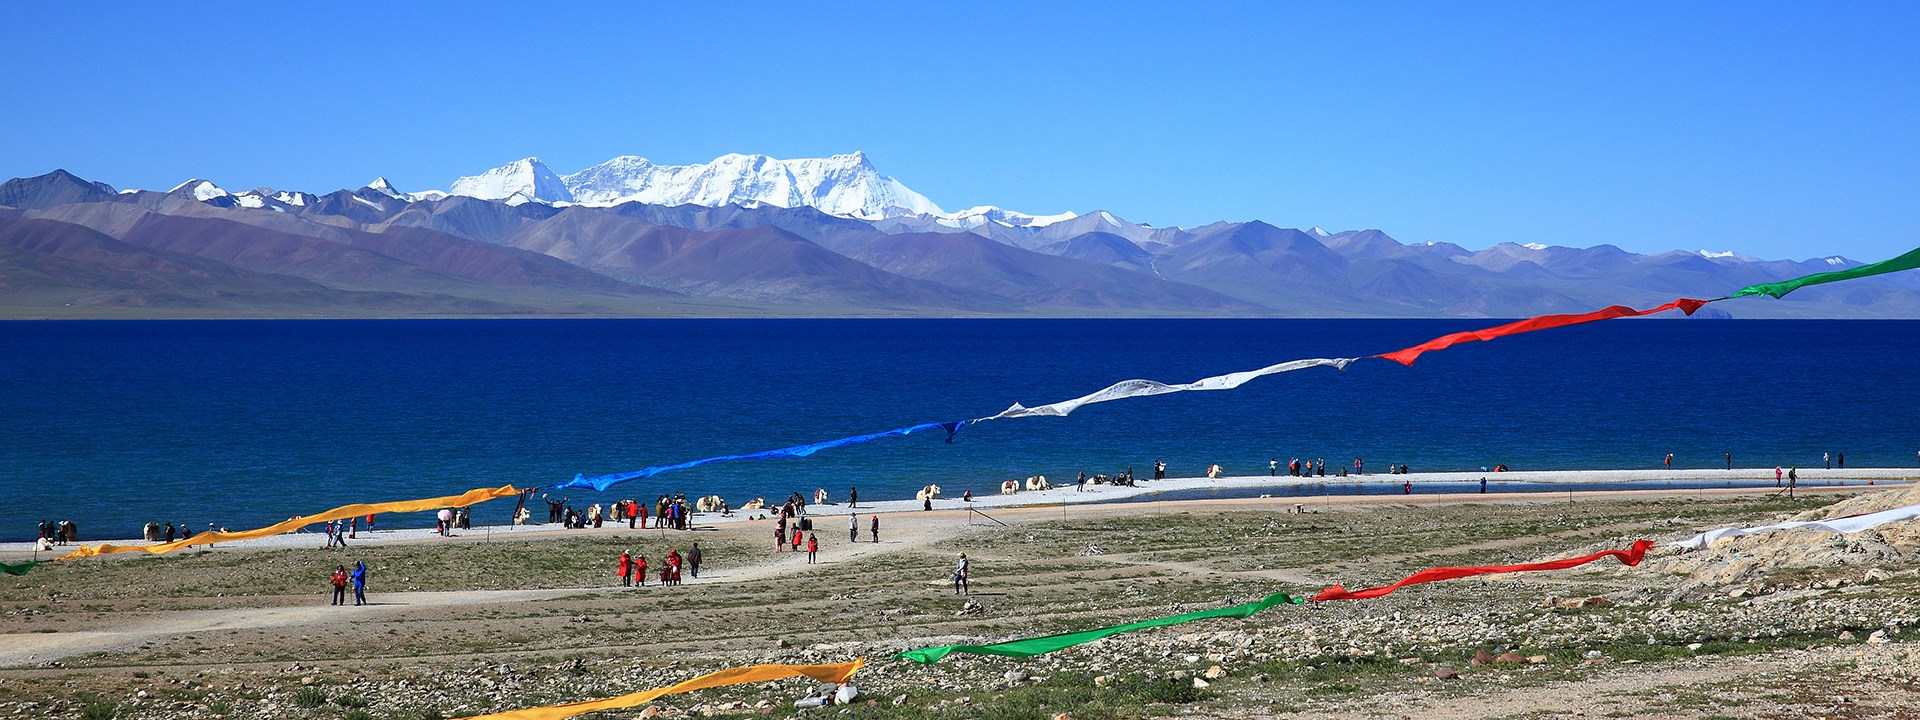 The Most Fascinating Places in Central Tibet